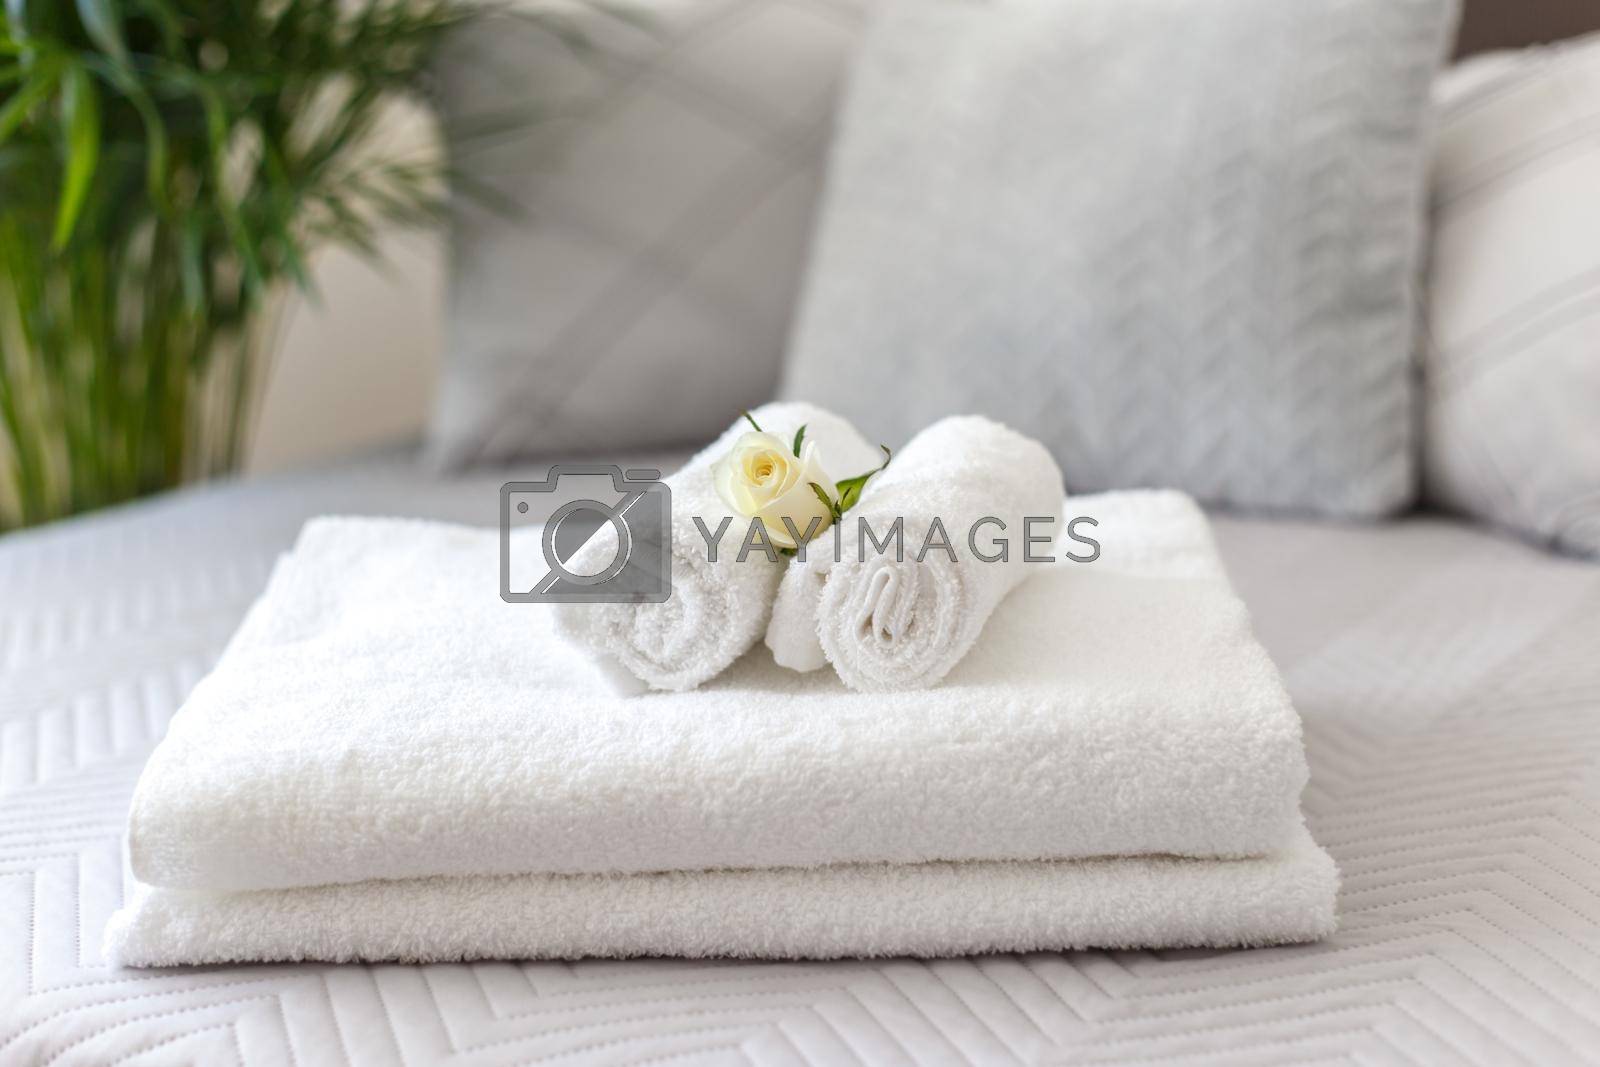 Royalty free image of Rolled white towels on the bed in the hotel room by Lana_M